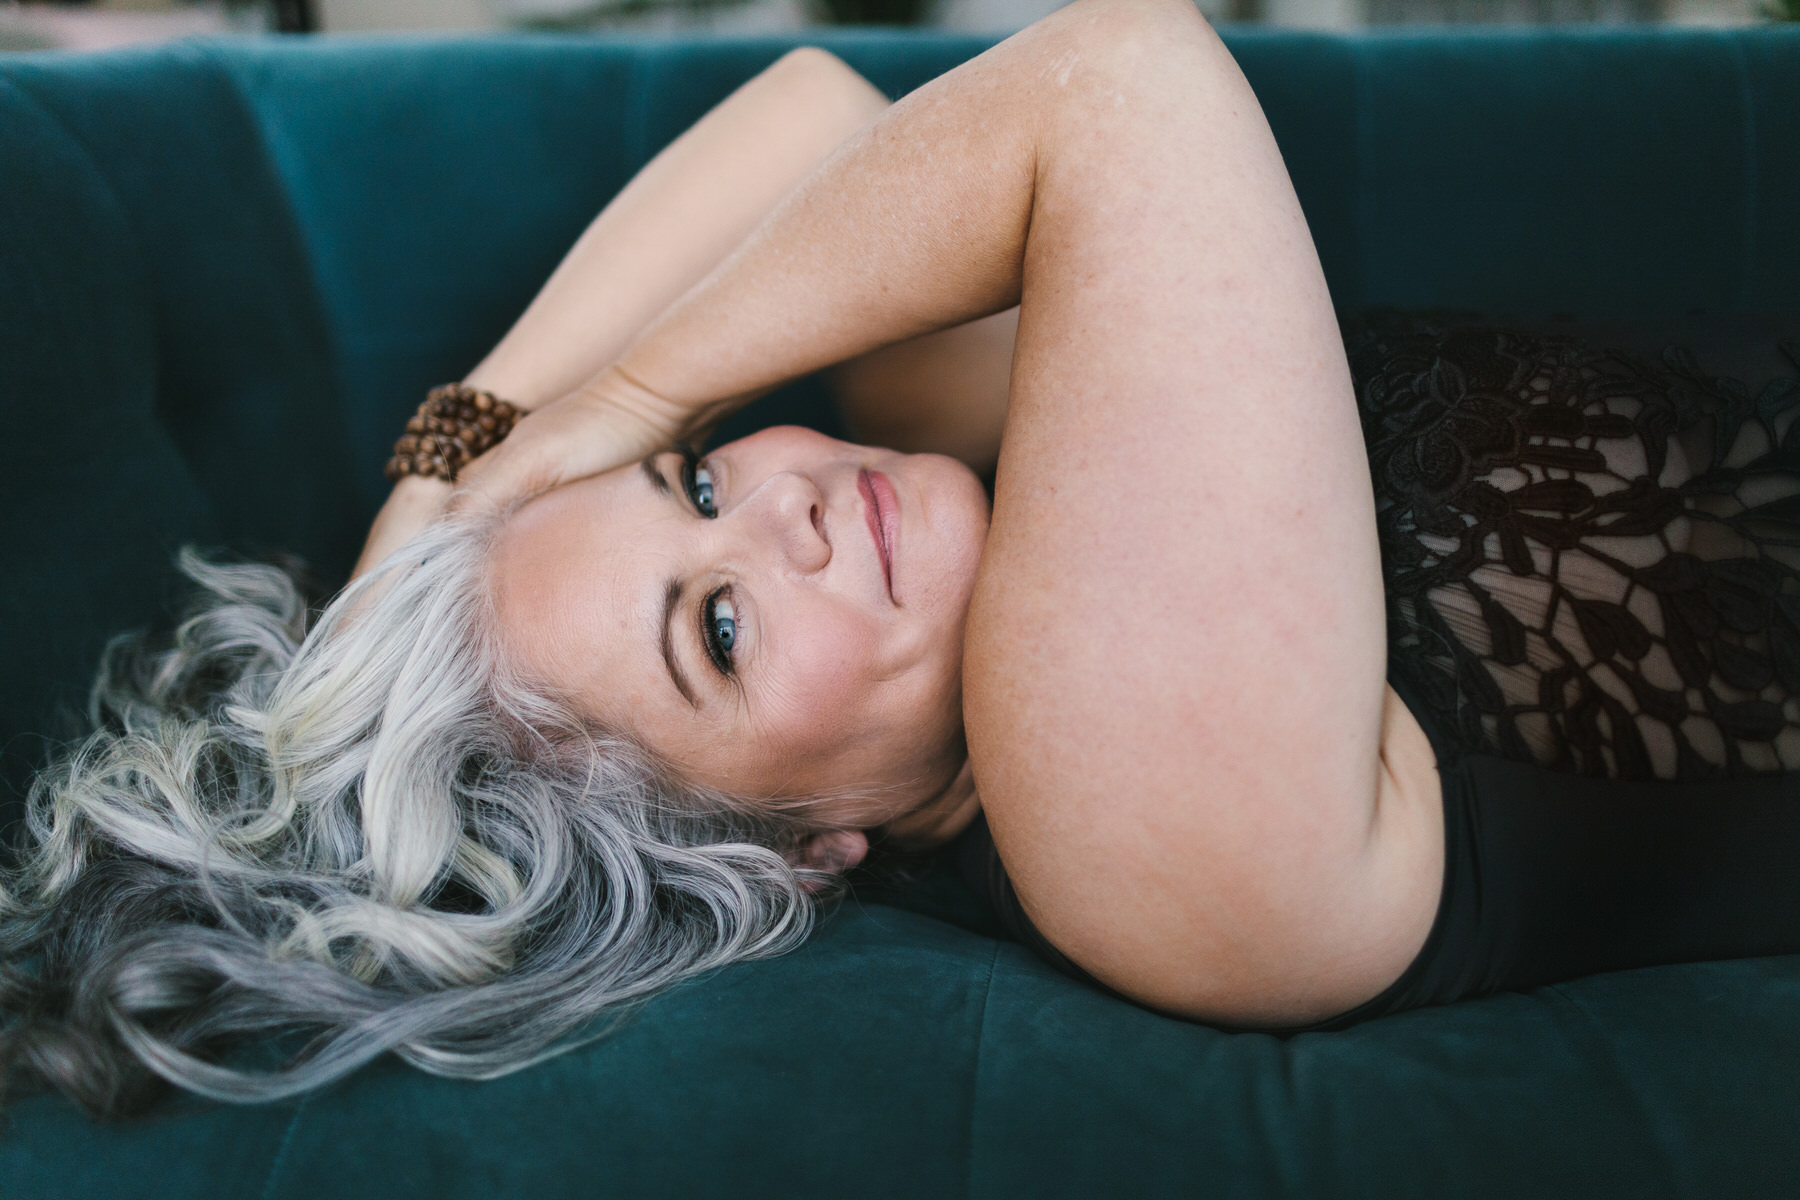 grey haired woman on teal sofa in black lingerie; Celebrate Their Journey With Boudoir Photography by Lindsay Hite